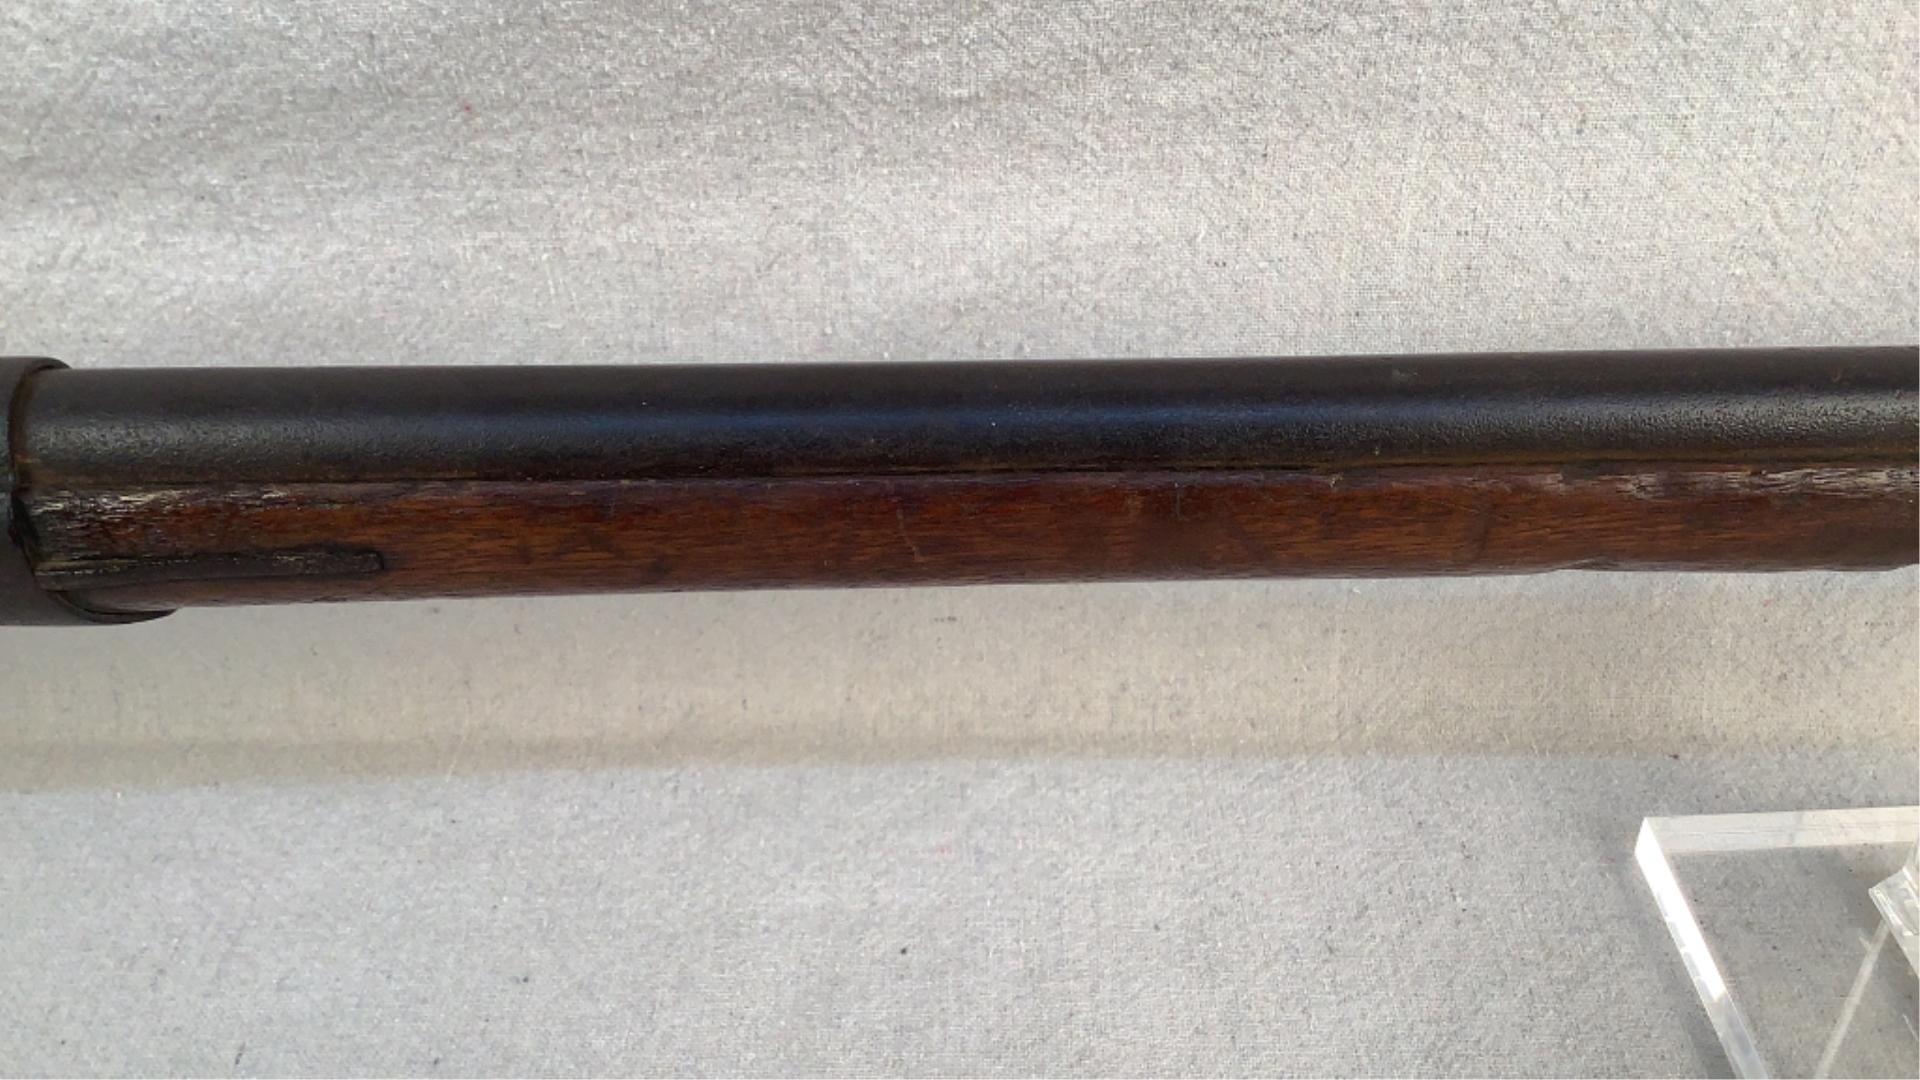 Harpers Ferry Model 1816 .69 Smoothbore